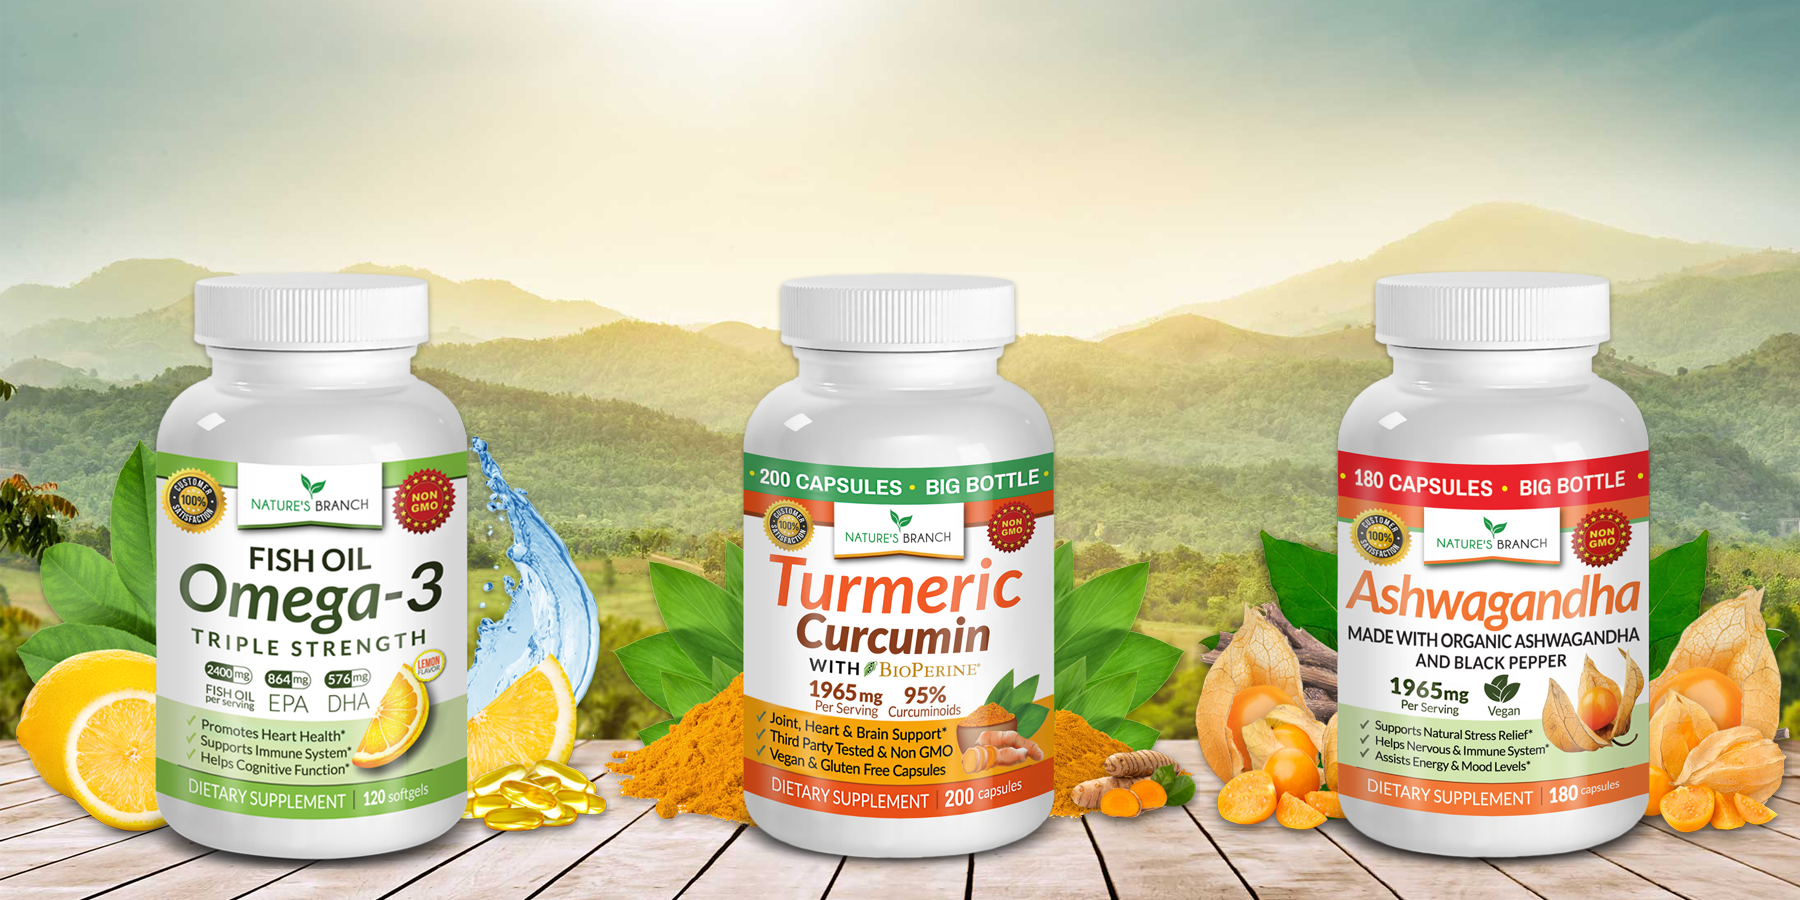 Nature's Branch Omega 3 Fish Oil Turmeric Curcumin and Ashwagandha supplement bottles on a wood table